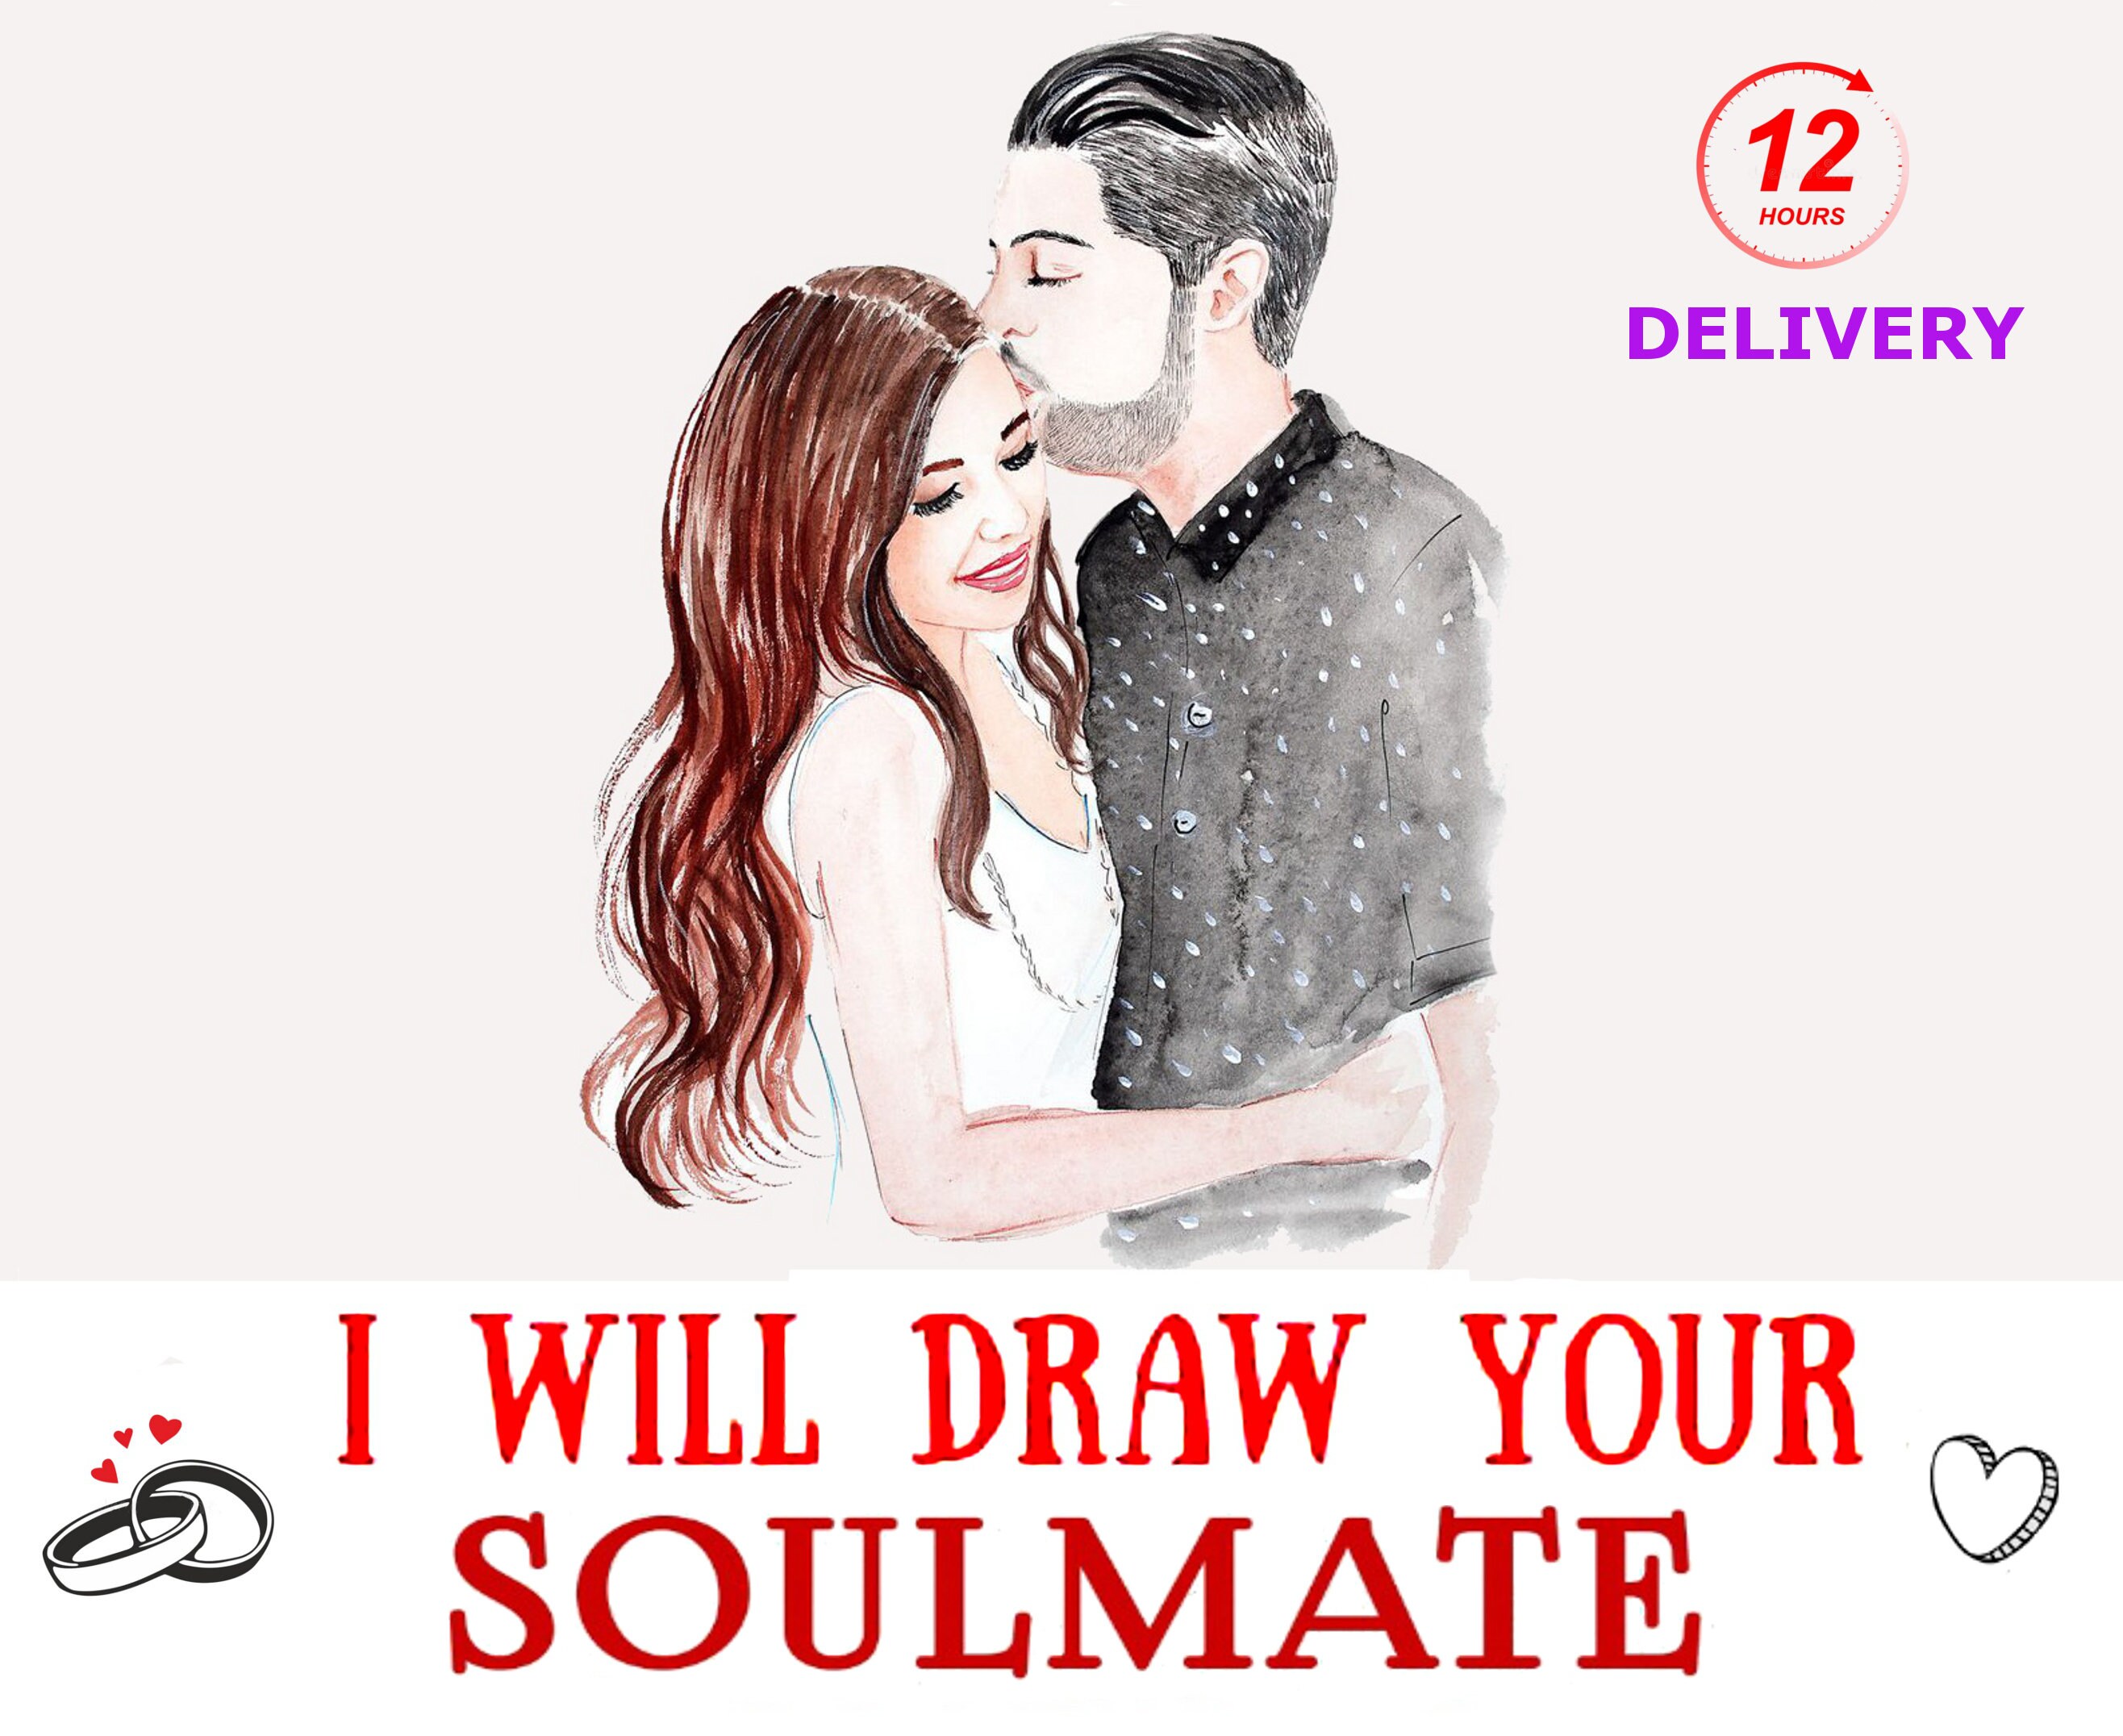  ATTENTION  SOULMATE SKETCH REVIEW  SOULMATE SKETCH LEGIT  SOULMATE  SKETCH DRAWING 2023   YouTube